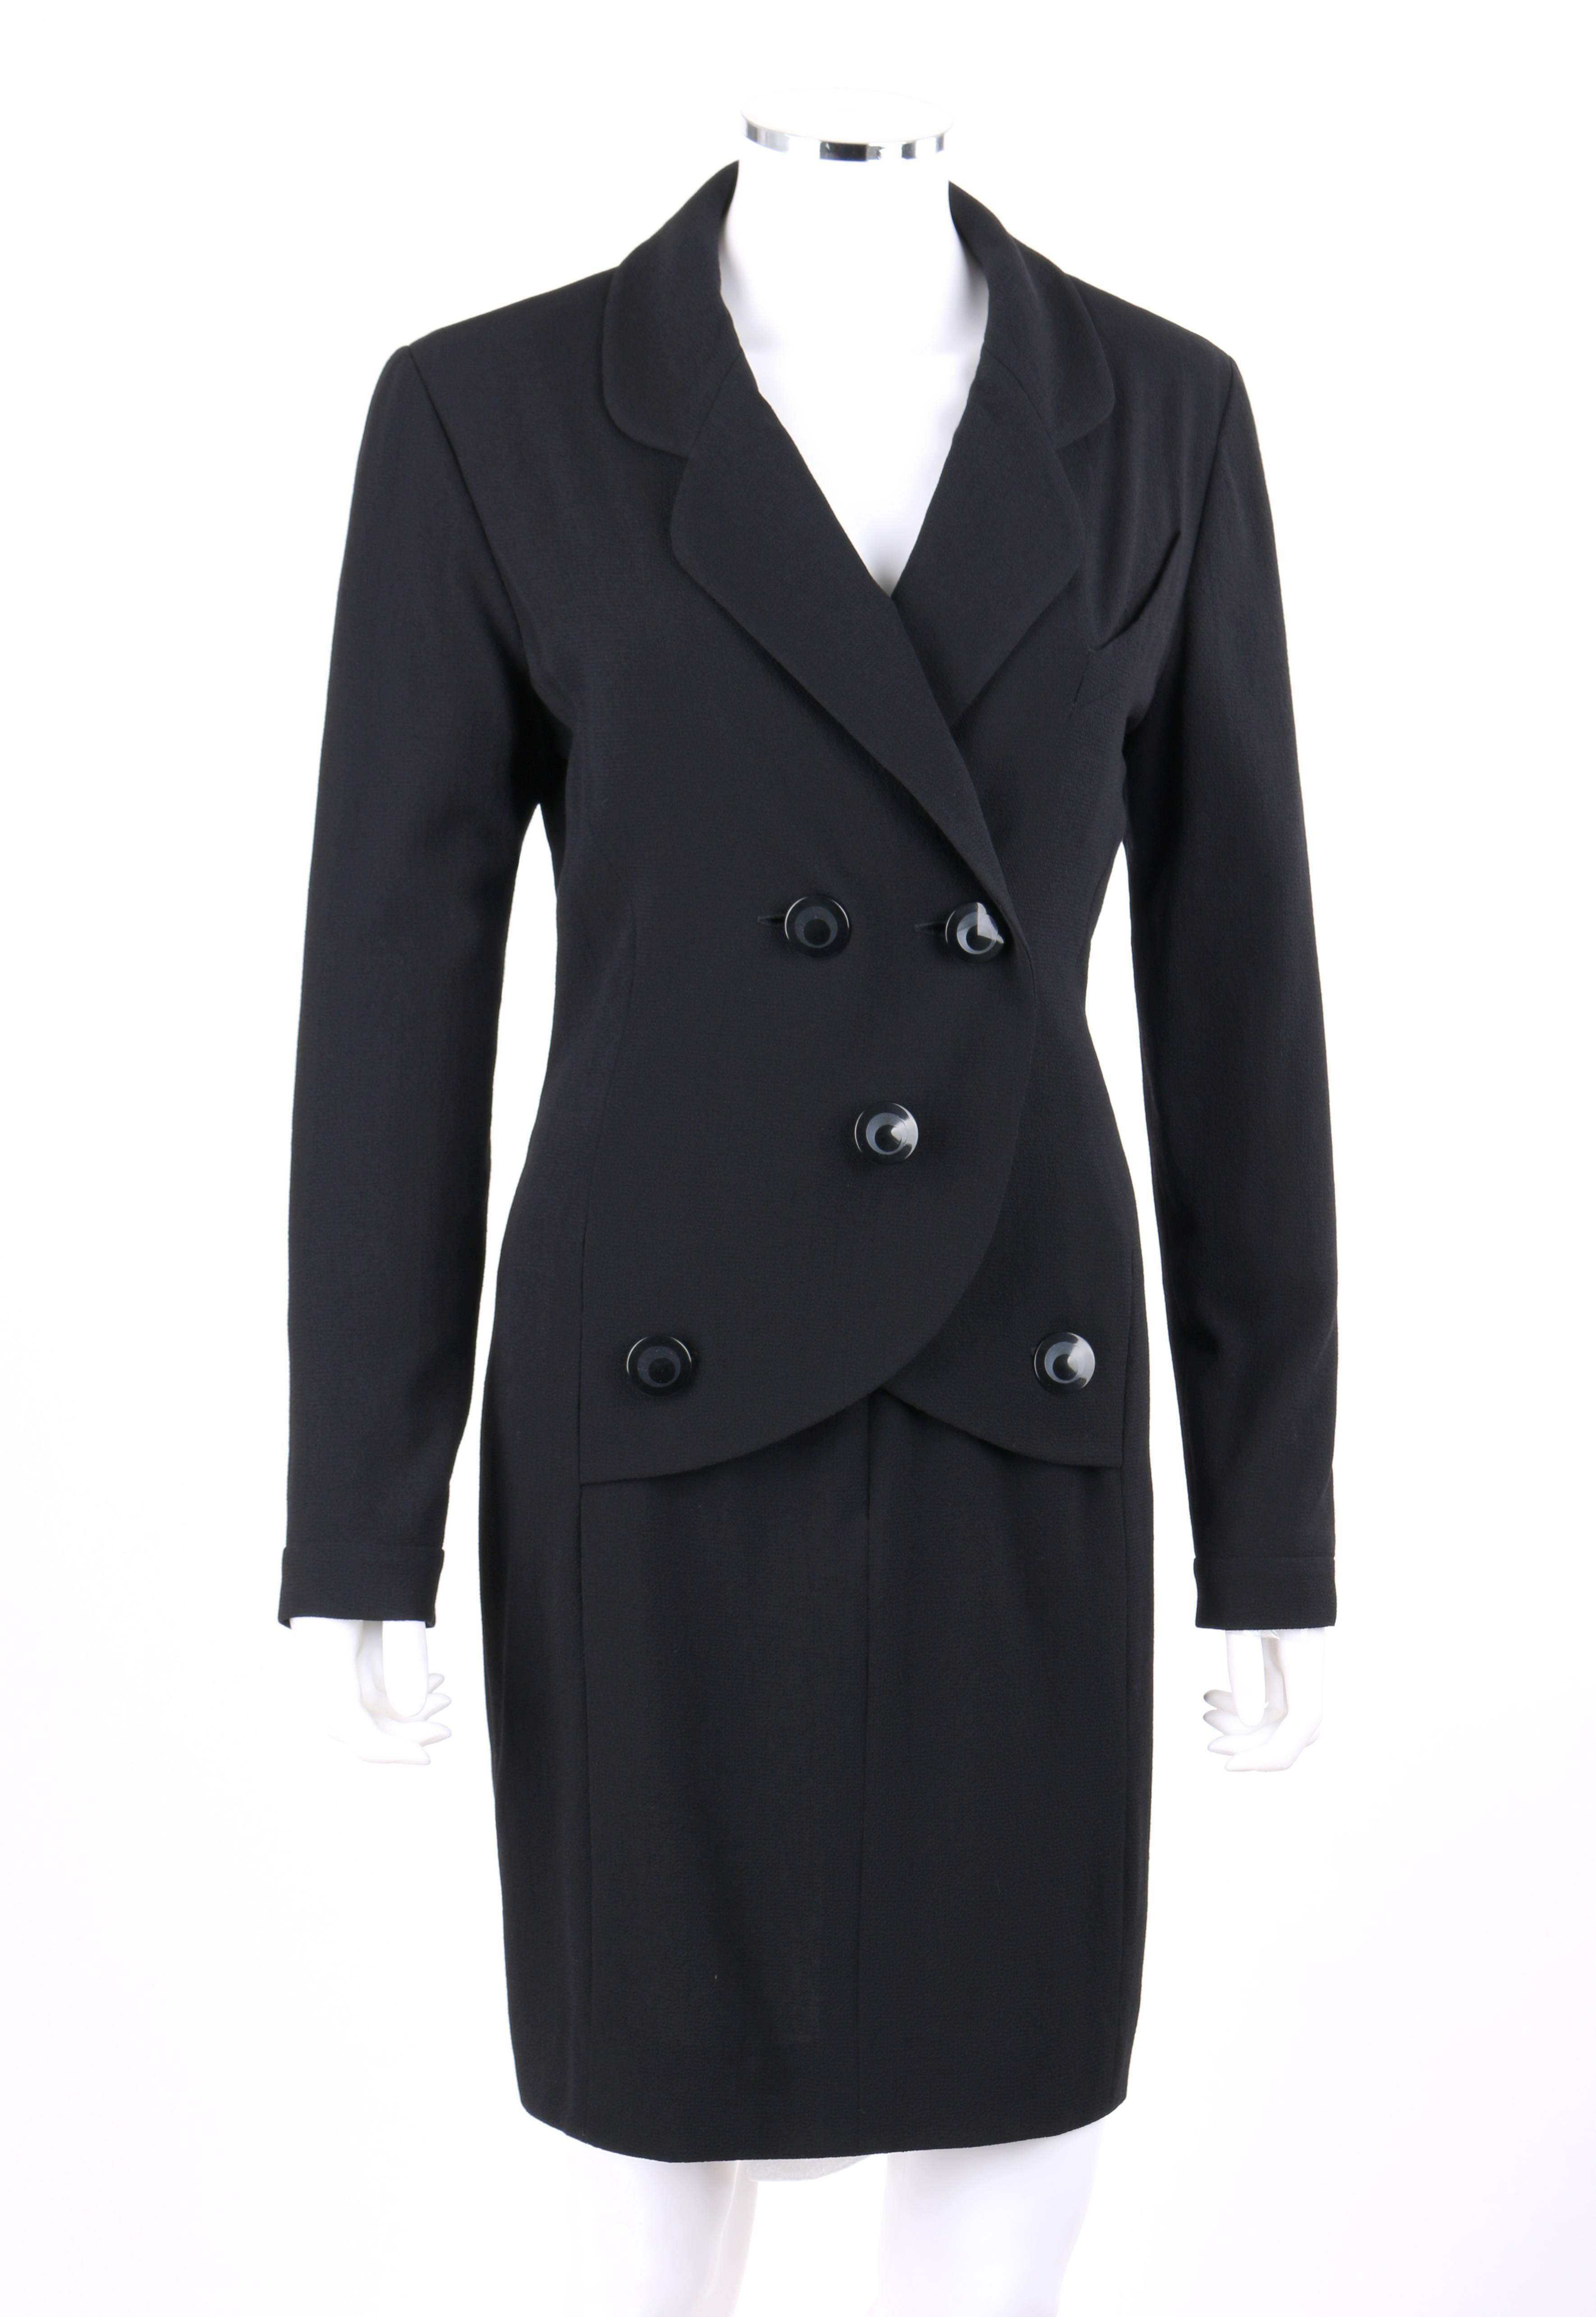 Chanel Boutique c.1980's black wool crepe double breasted one piece dress suit. Designed by Karl Lagerfeld. One piece mock blazer and pencil skirt dress suit. Rounded notched lapel collar. Long sleeves with single button closure at cuff. Five front